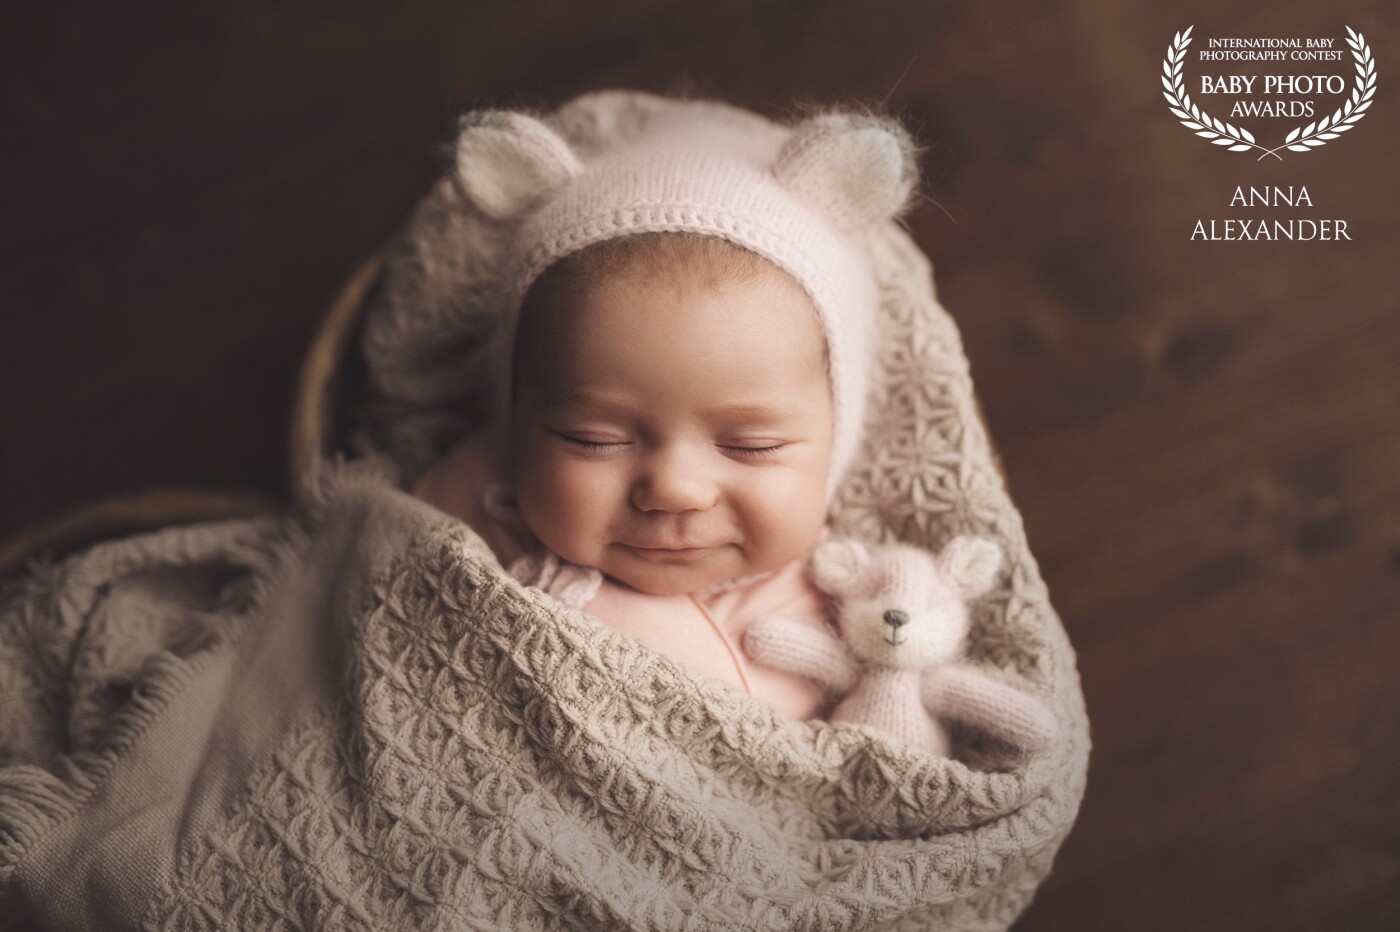 There is nothing cuter than a baby's smile. I love when I manage to capture it. And nice props make it twice the fun. Little toys and knitted hats add interest and compliment the baby.